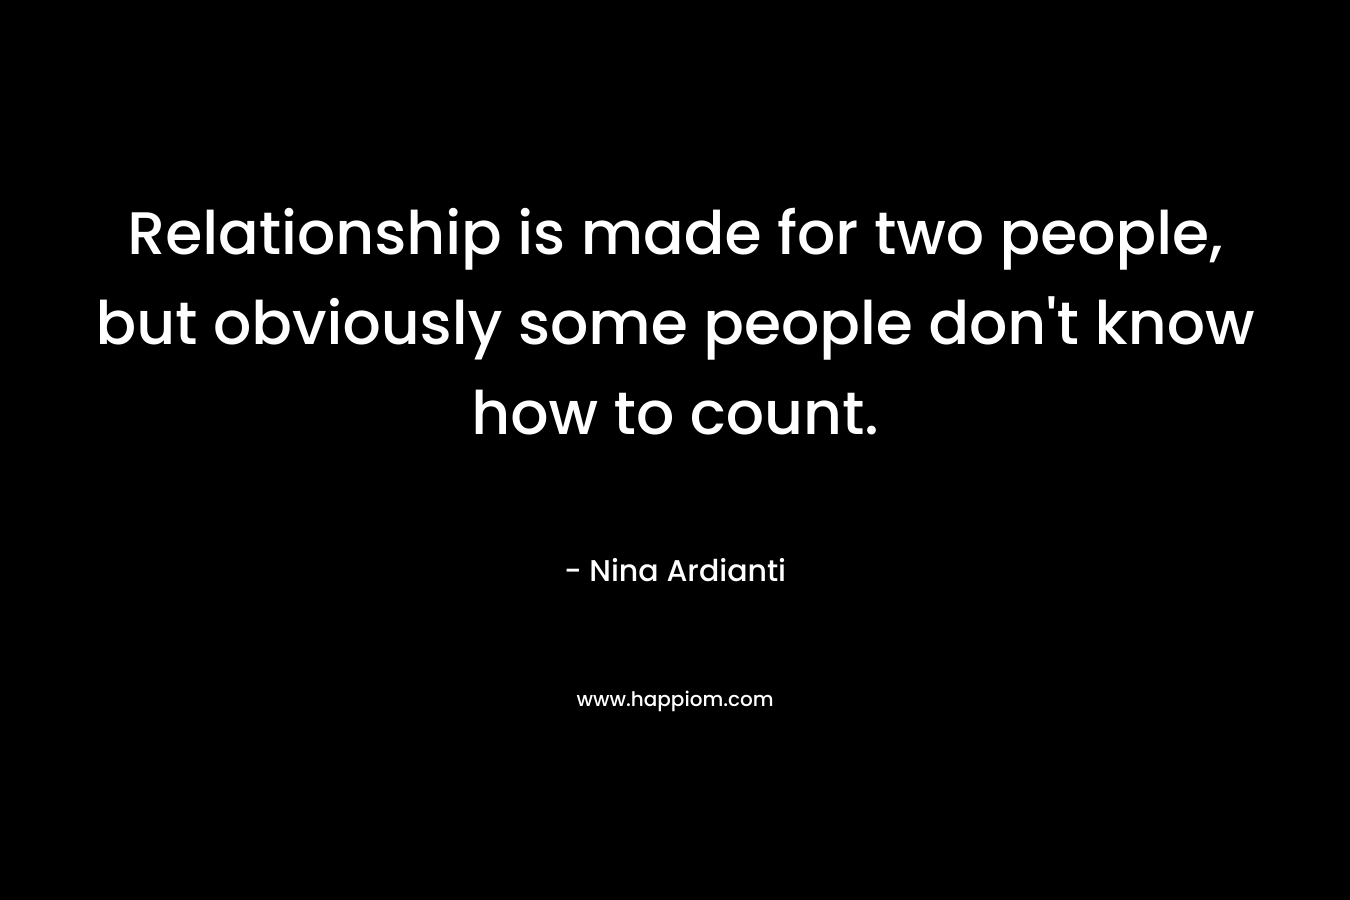 Relationship is made for two people, but obviously some people don't know how to count.